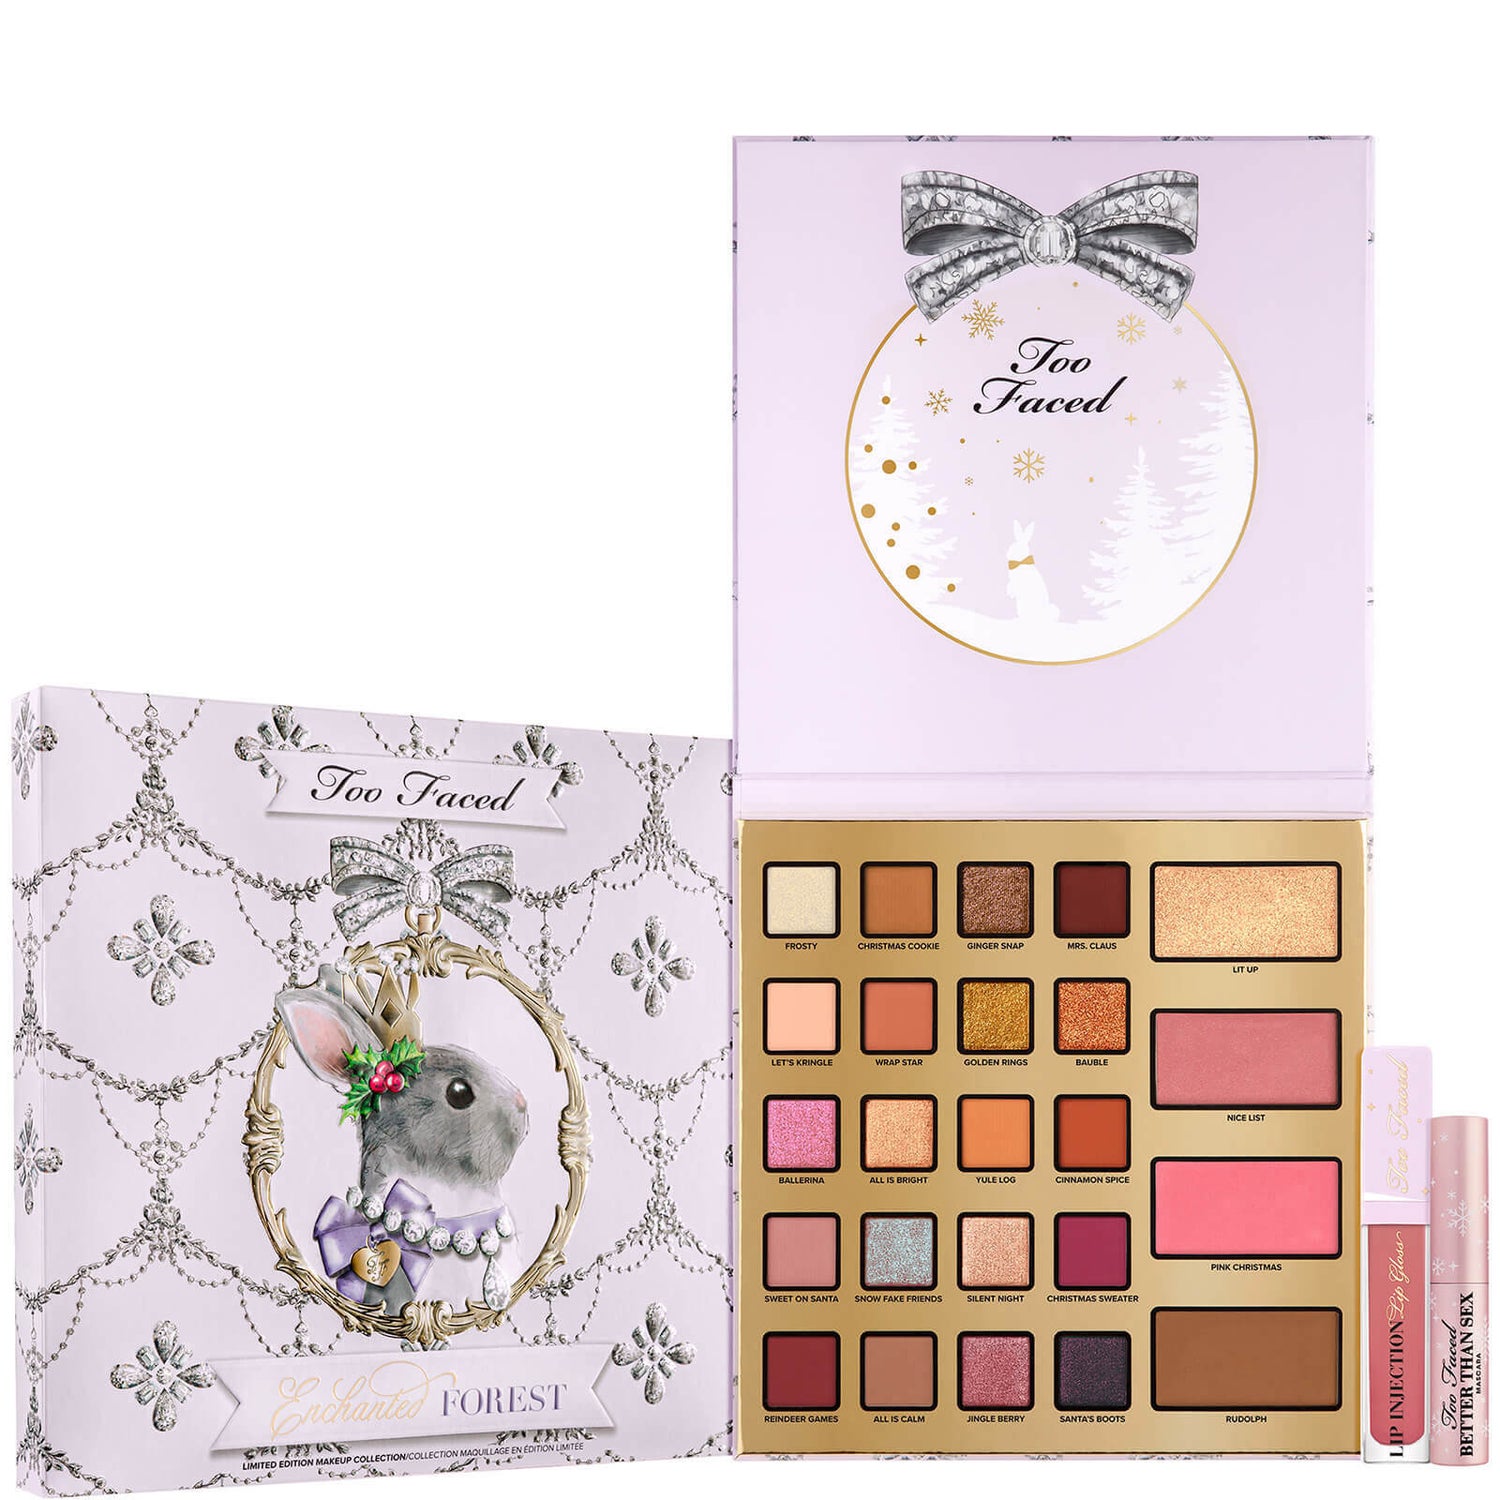 Too Faced Enchanted Forest Makeup Collection (Worth £89.00)